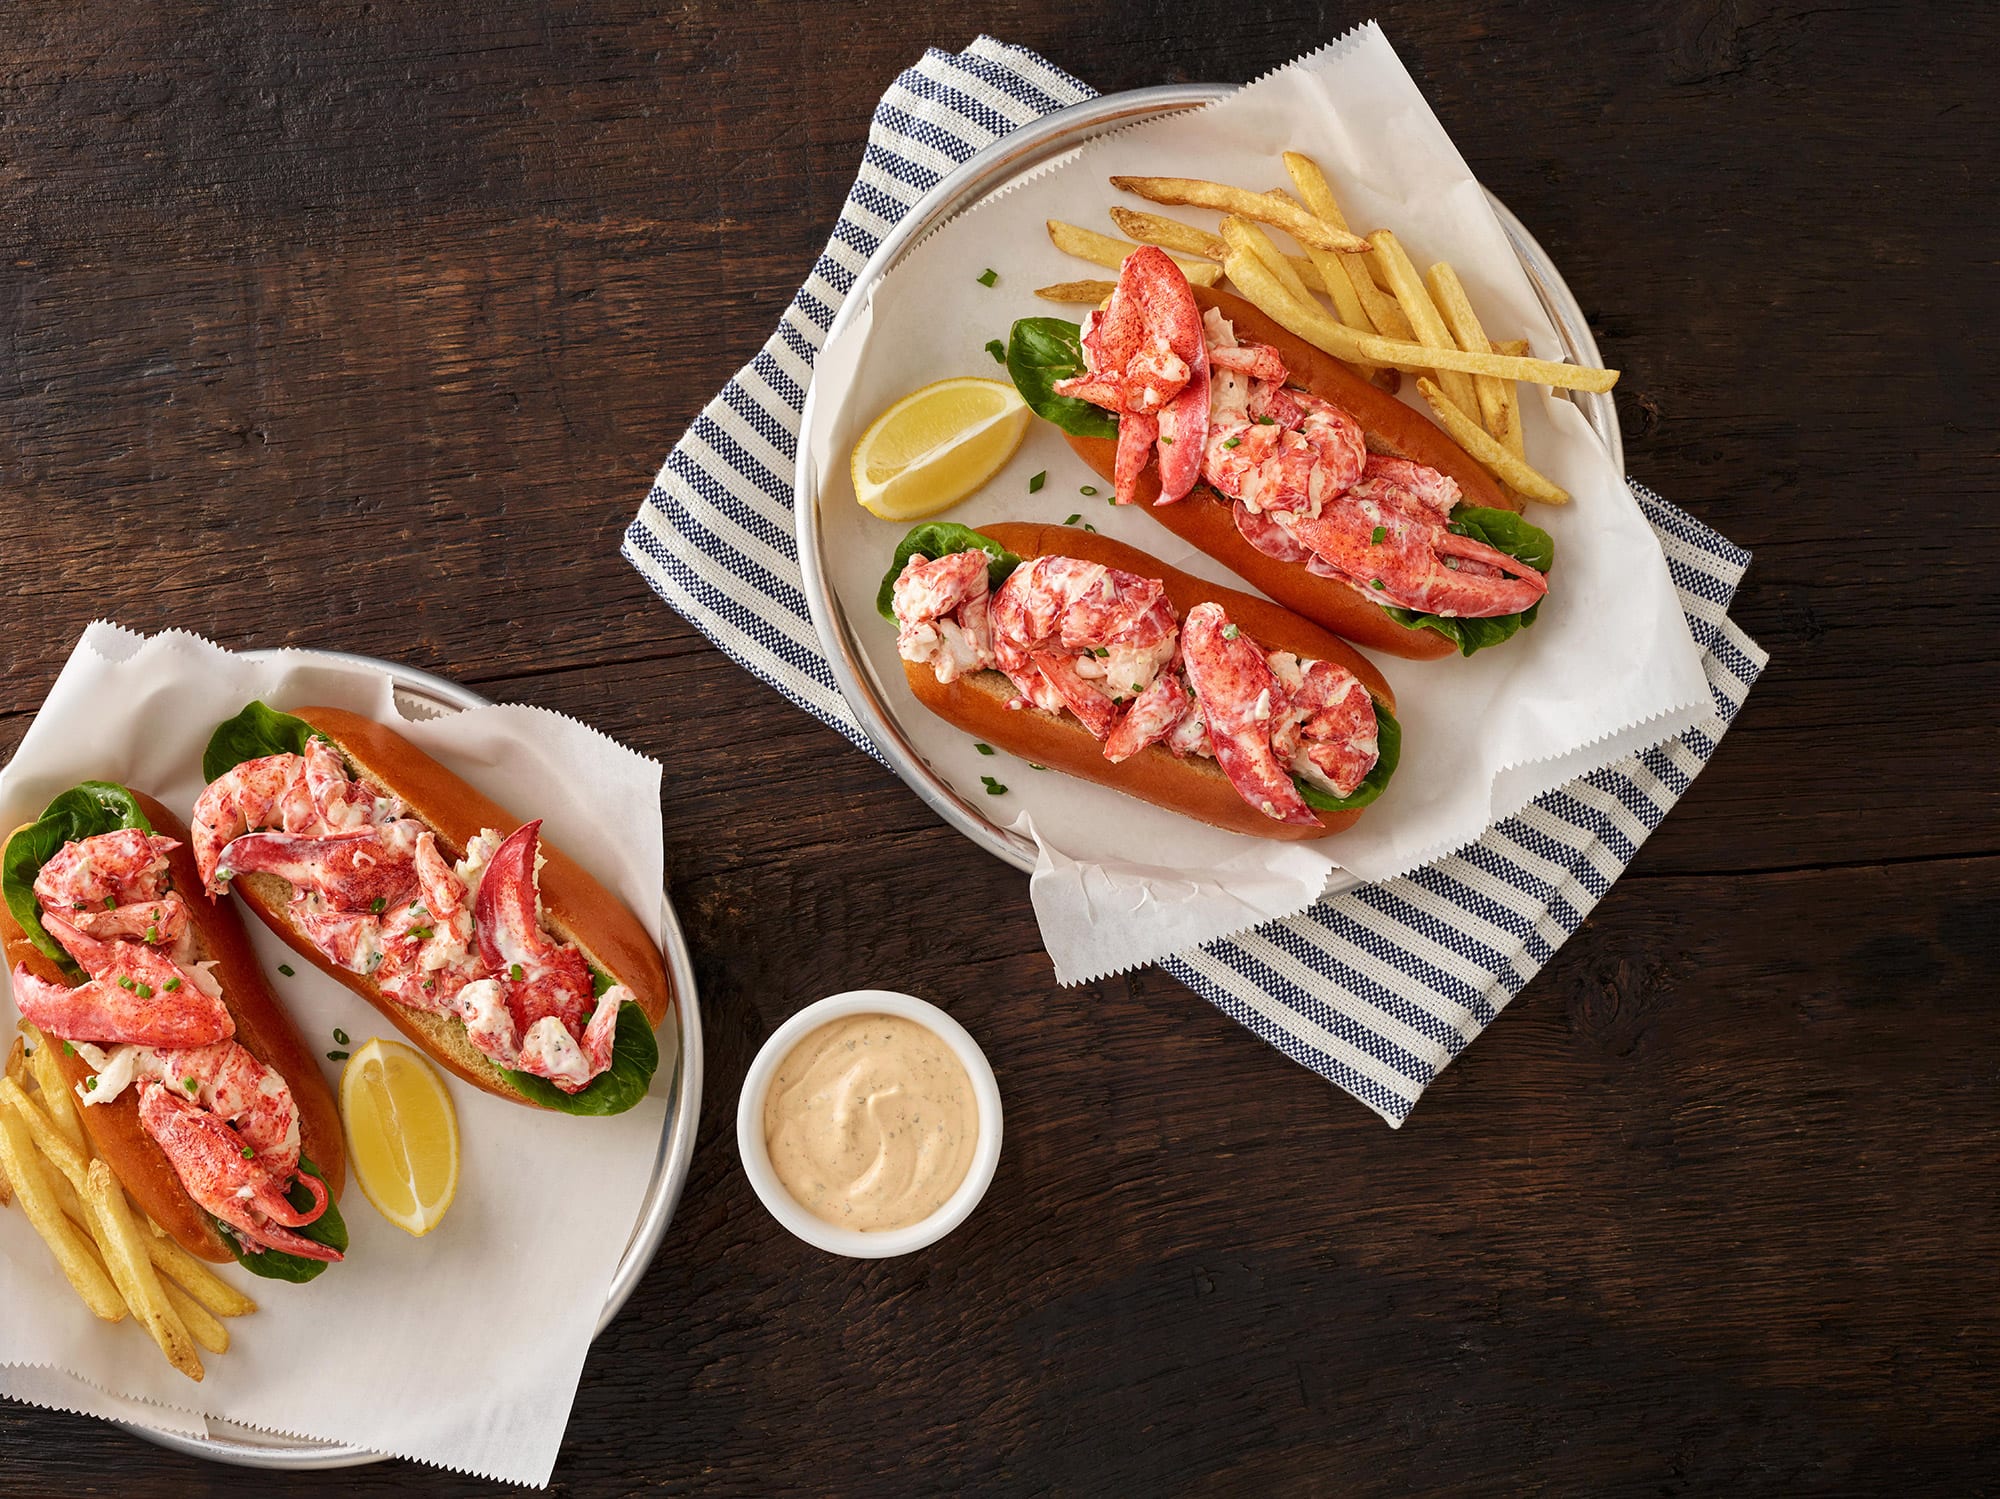 Maine Lobster vs Canadian Lobster: What’s the Difference?